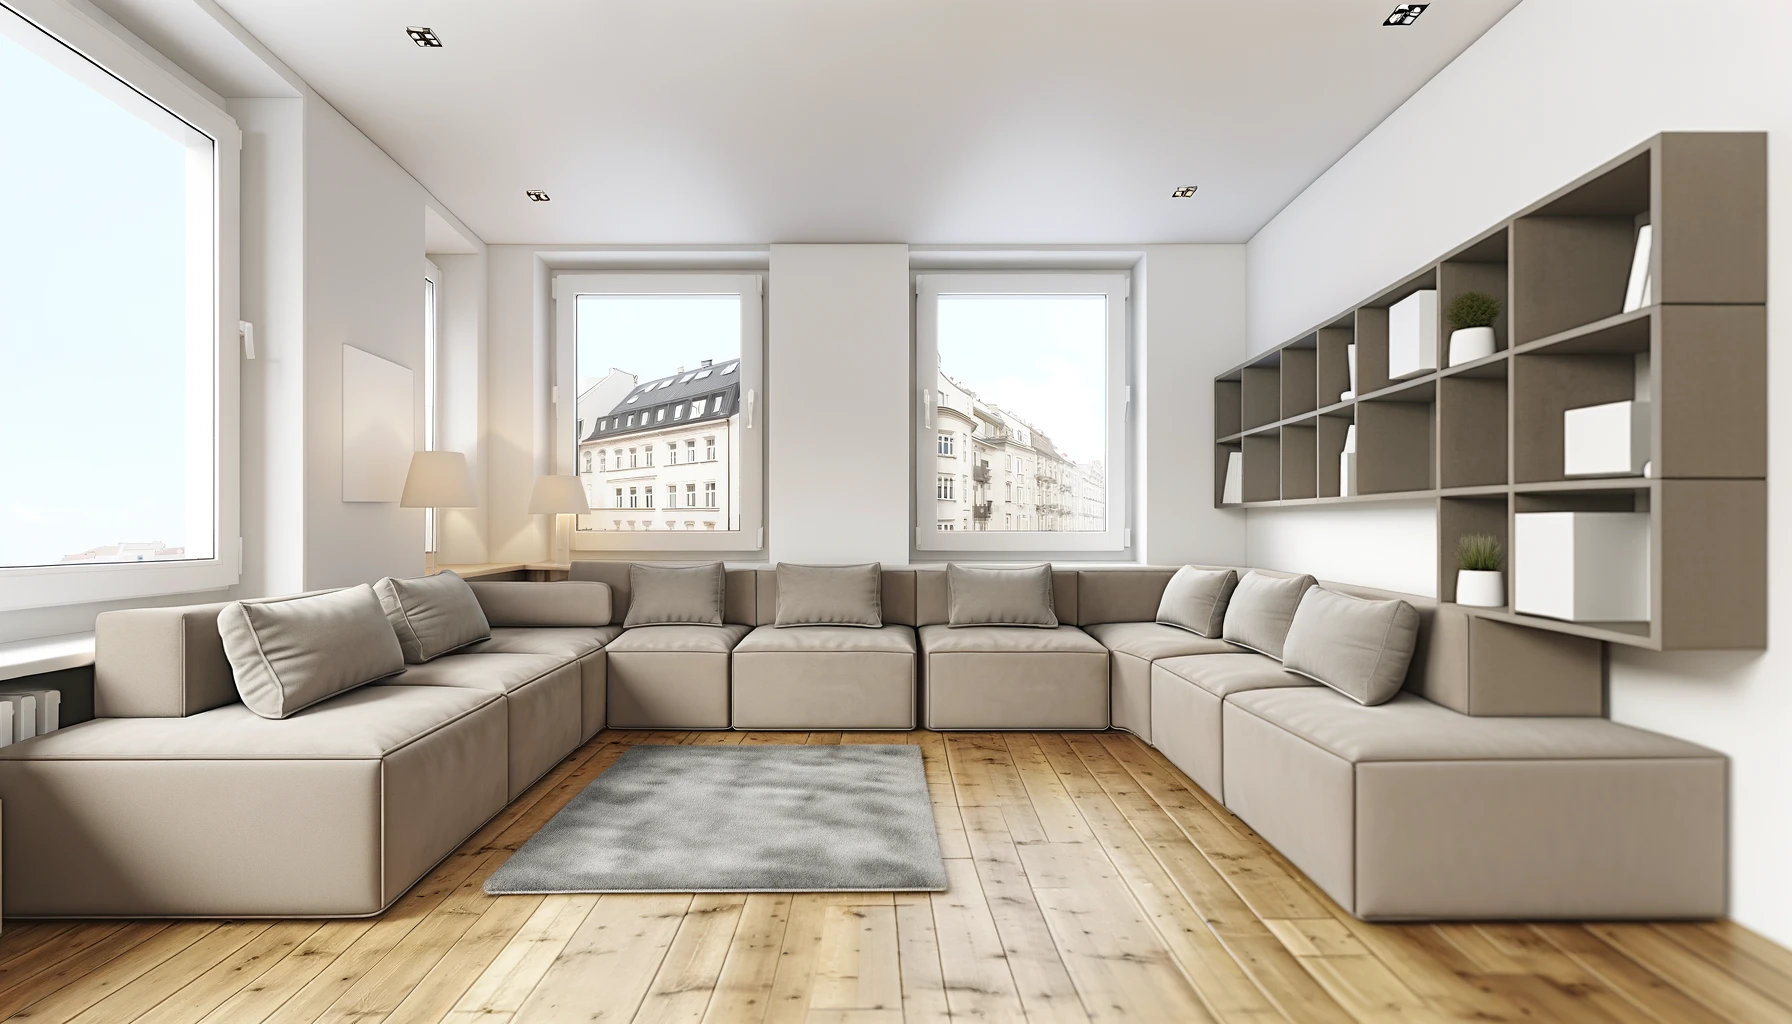 Modern living room with sectional sofa and shelving.